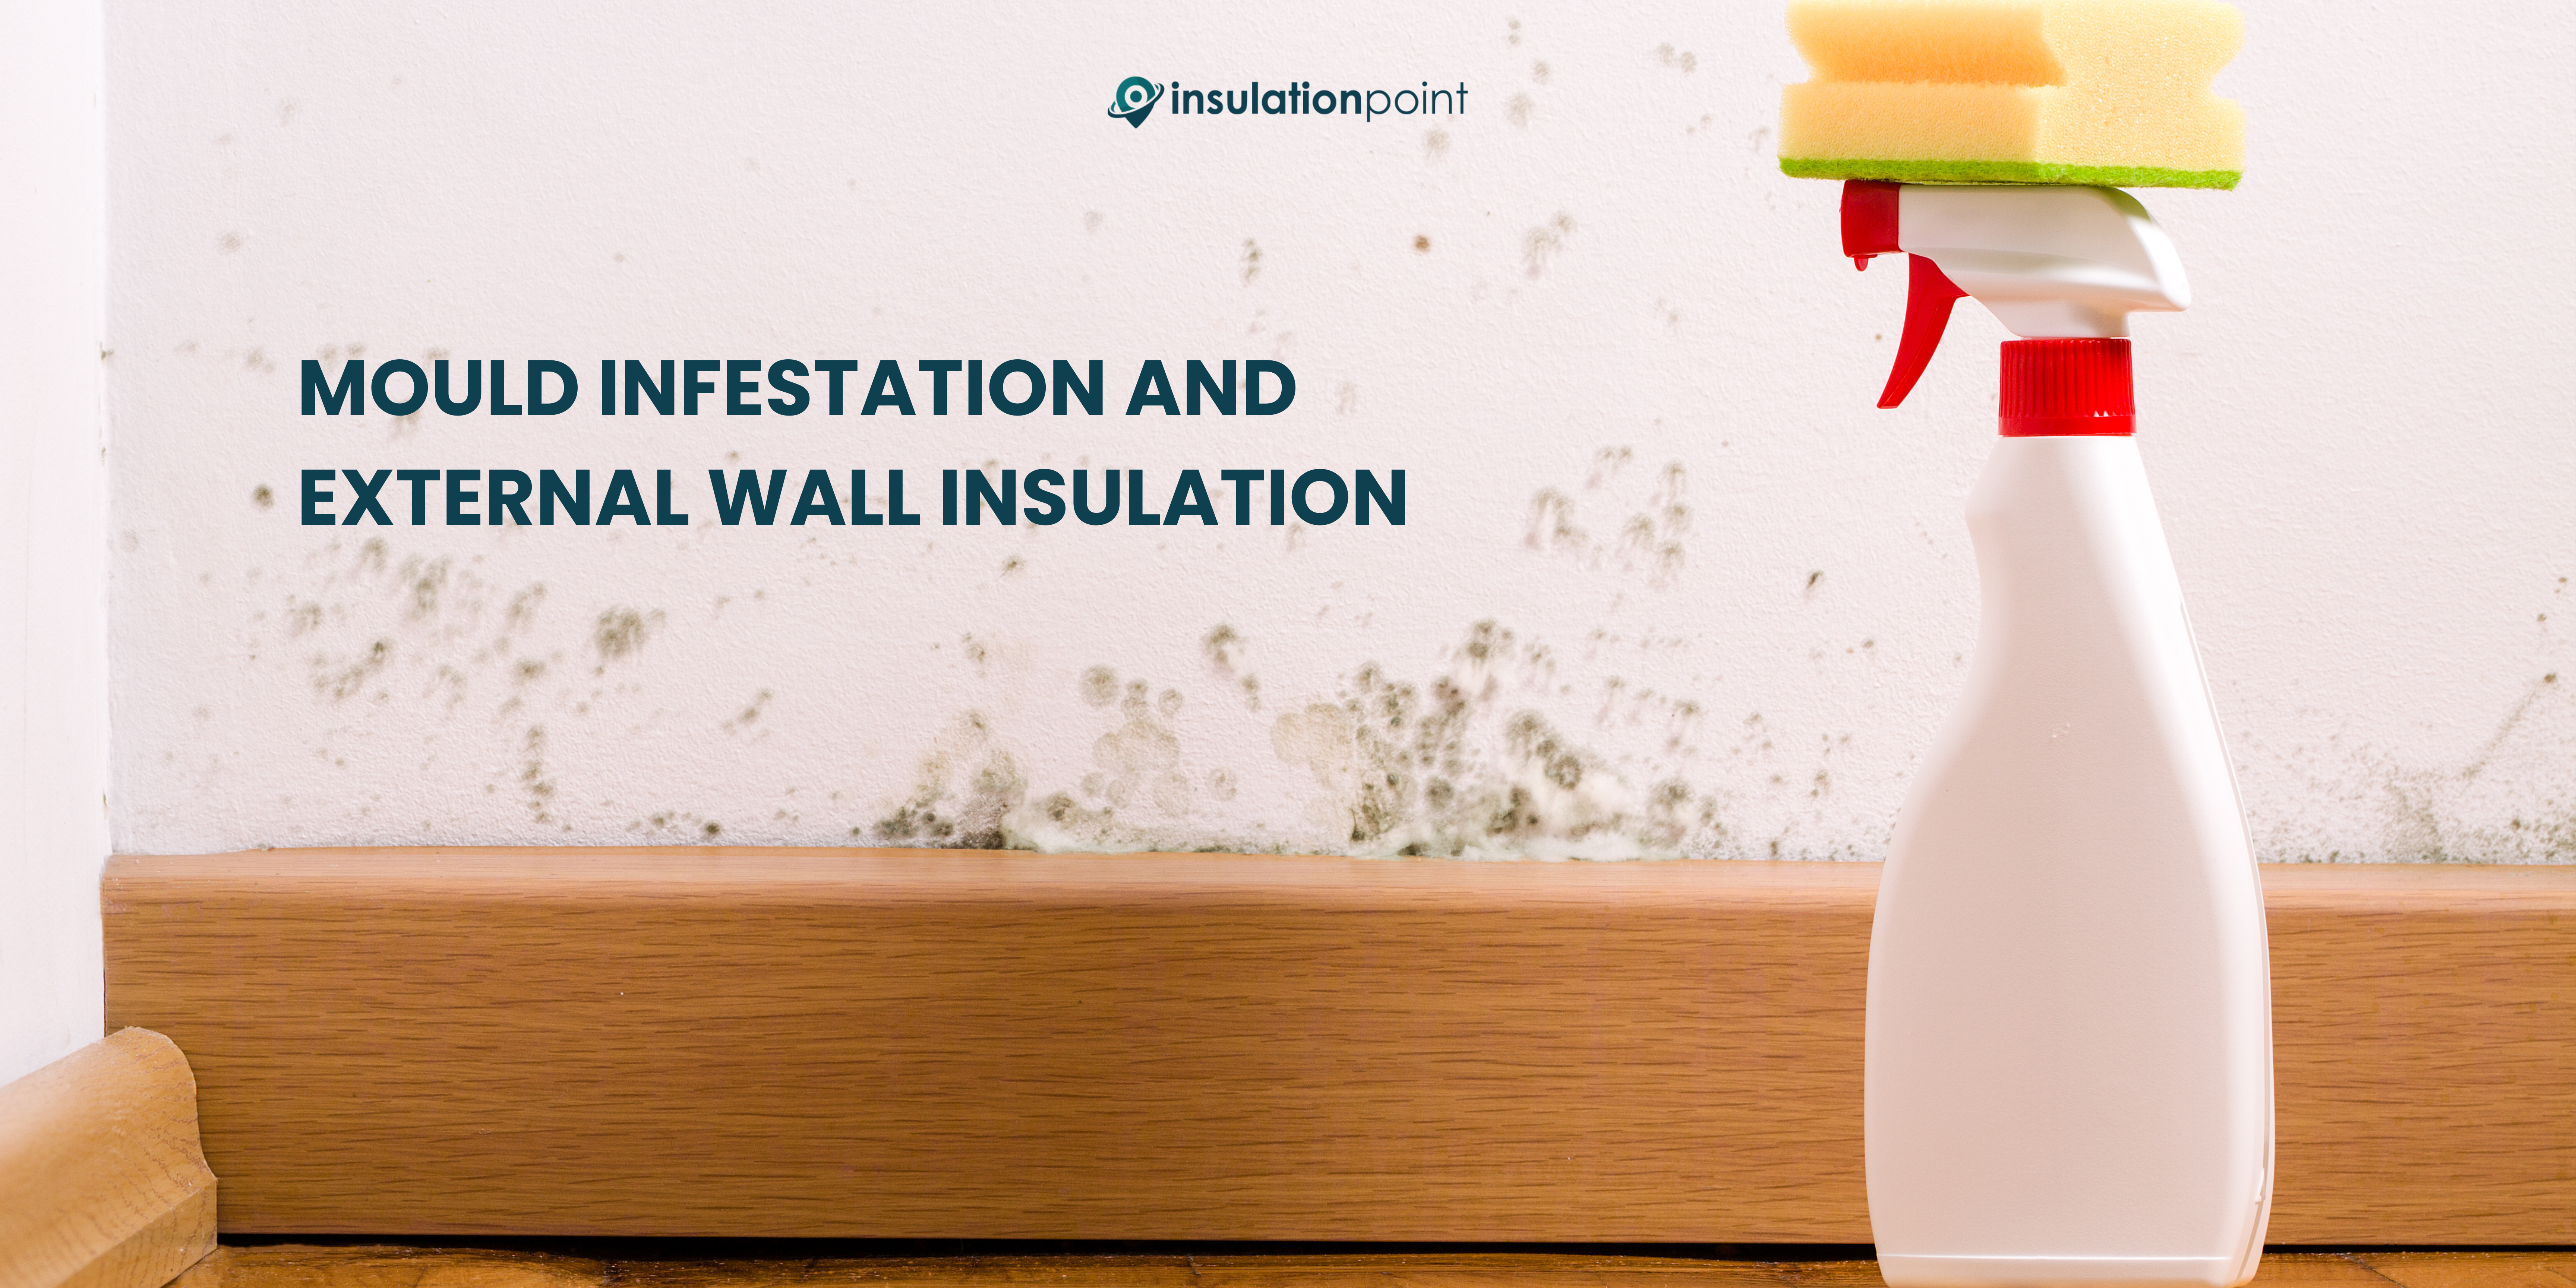 Mould Infestation and External Wall Insulation